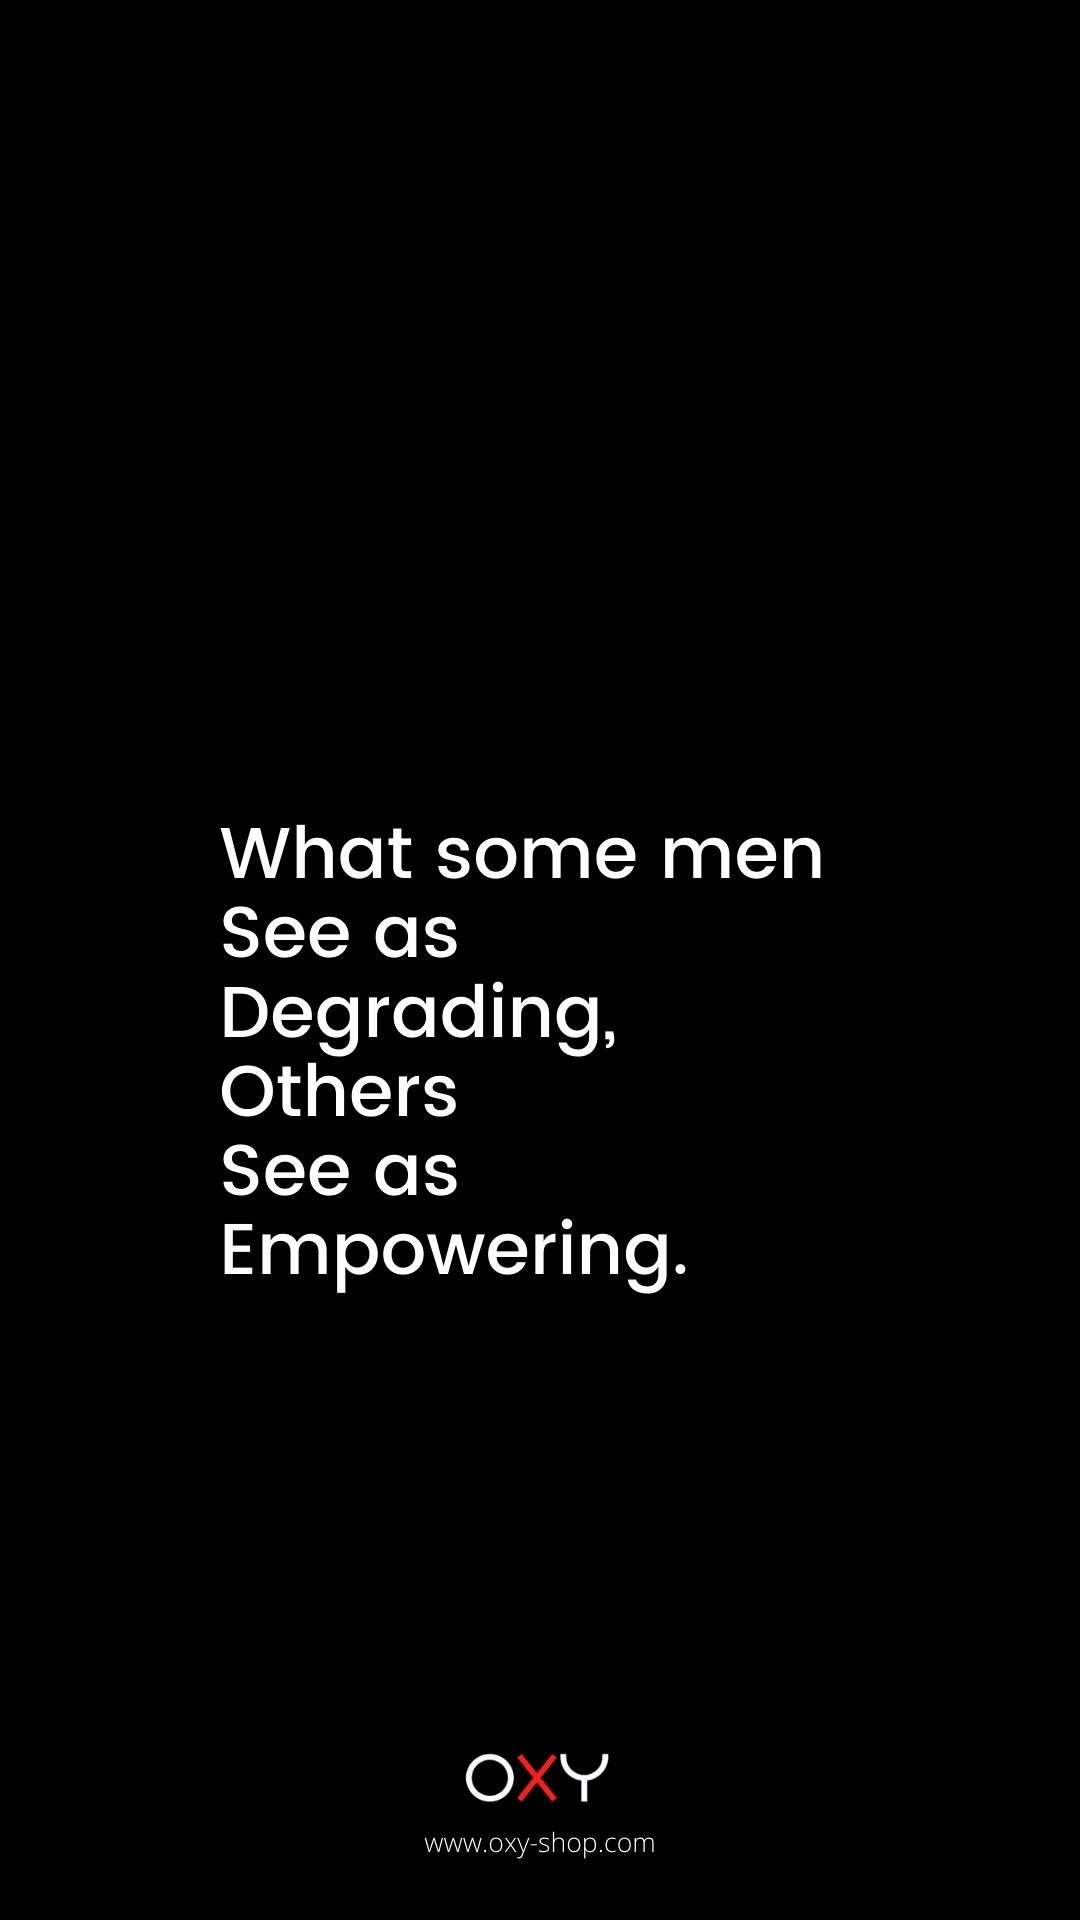 What some men see as degrading others see as empowering - BDSM wallpaper